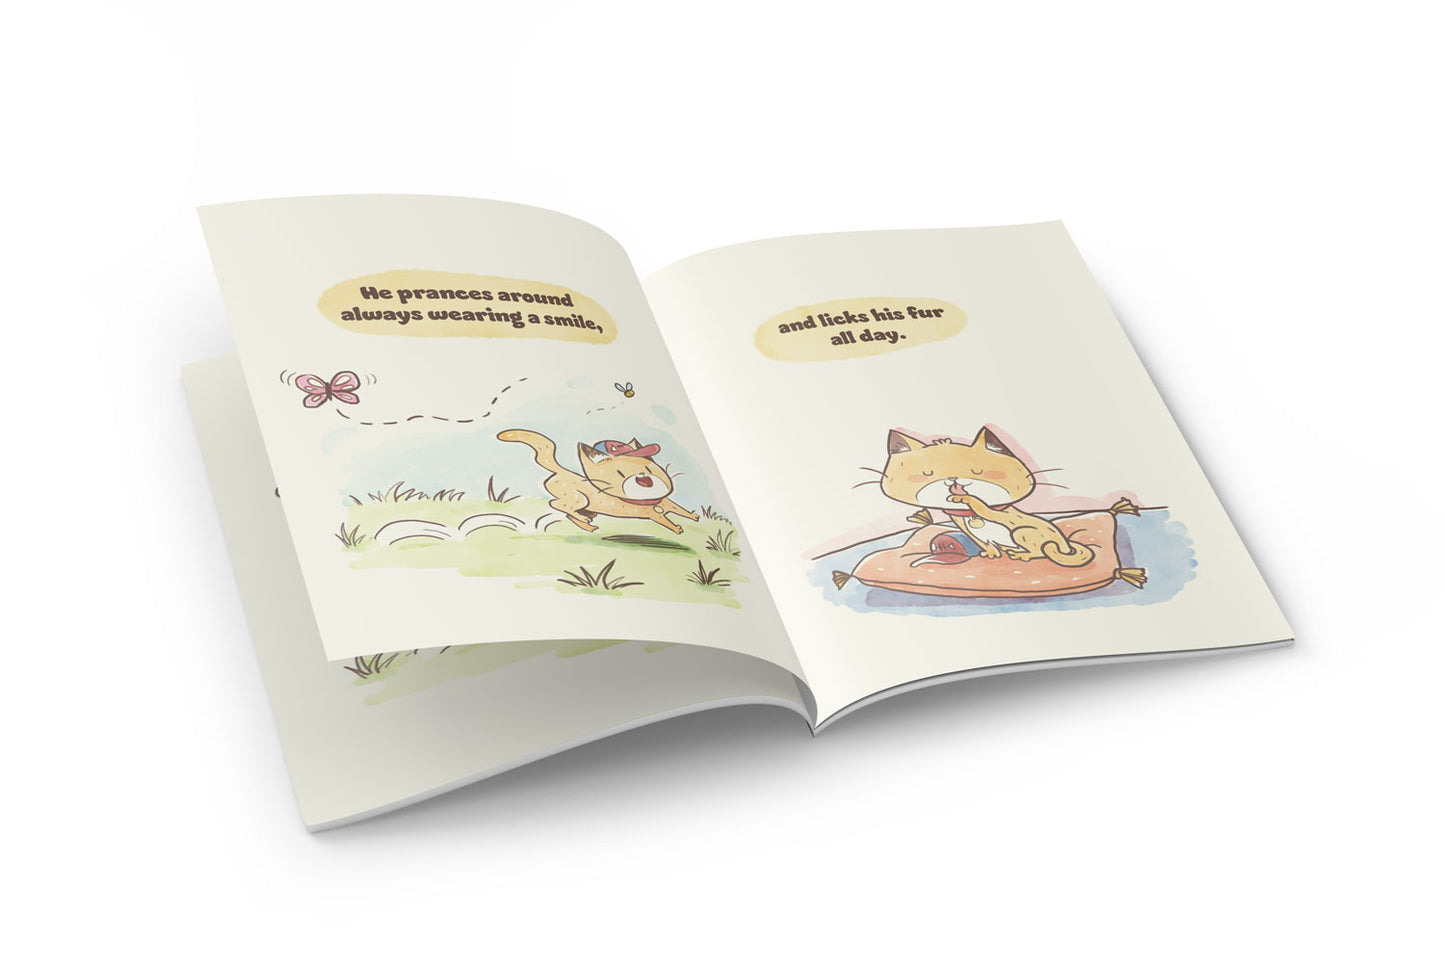 Fuzzo the Cat Goes Outside | Children’s Book